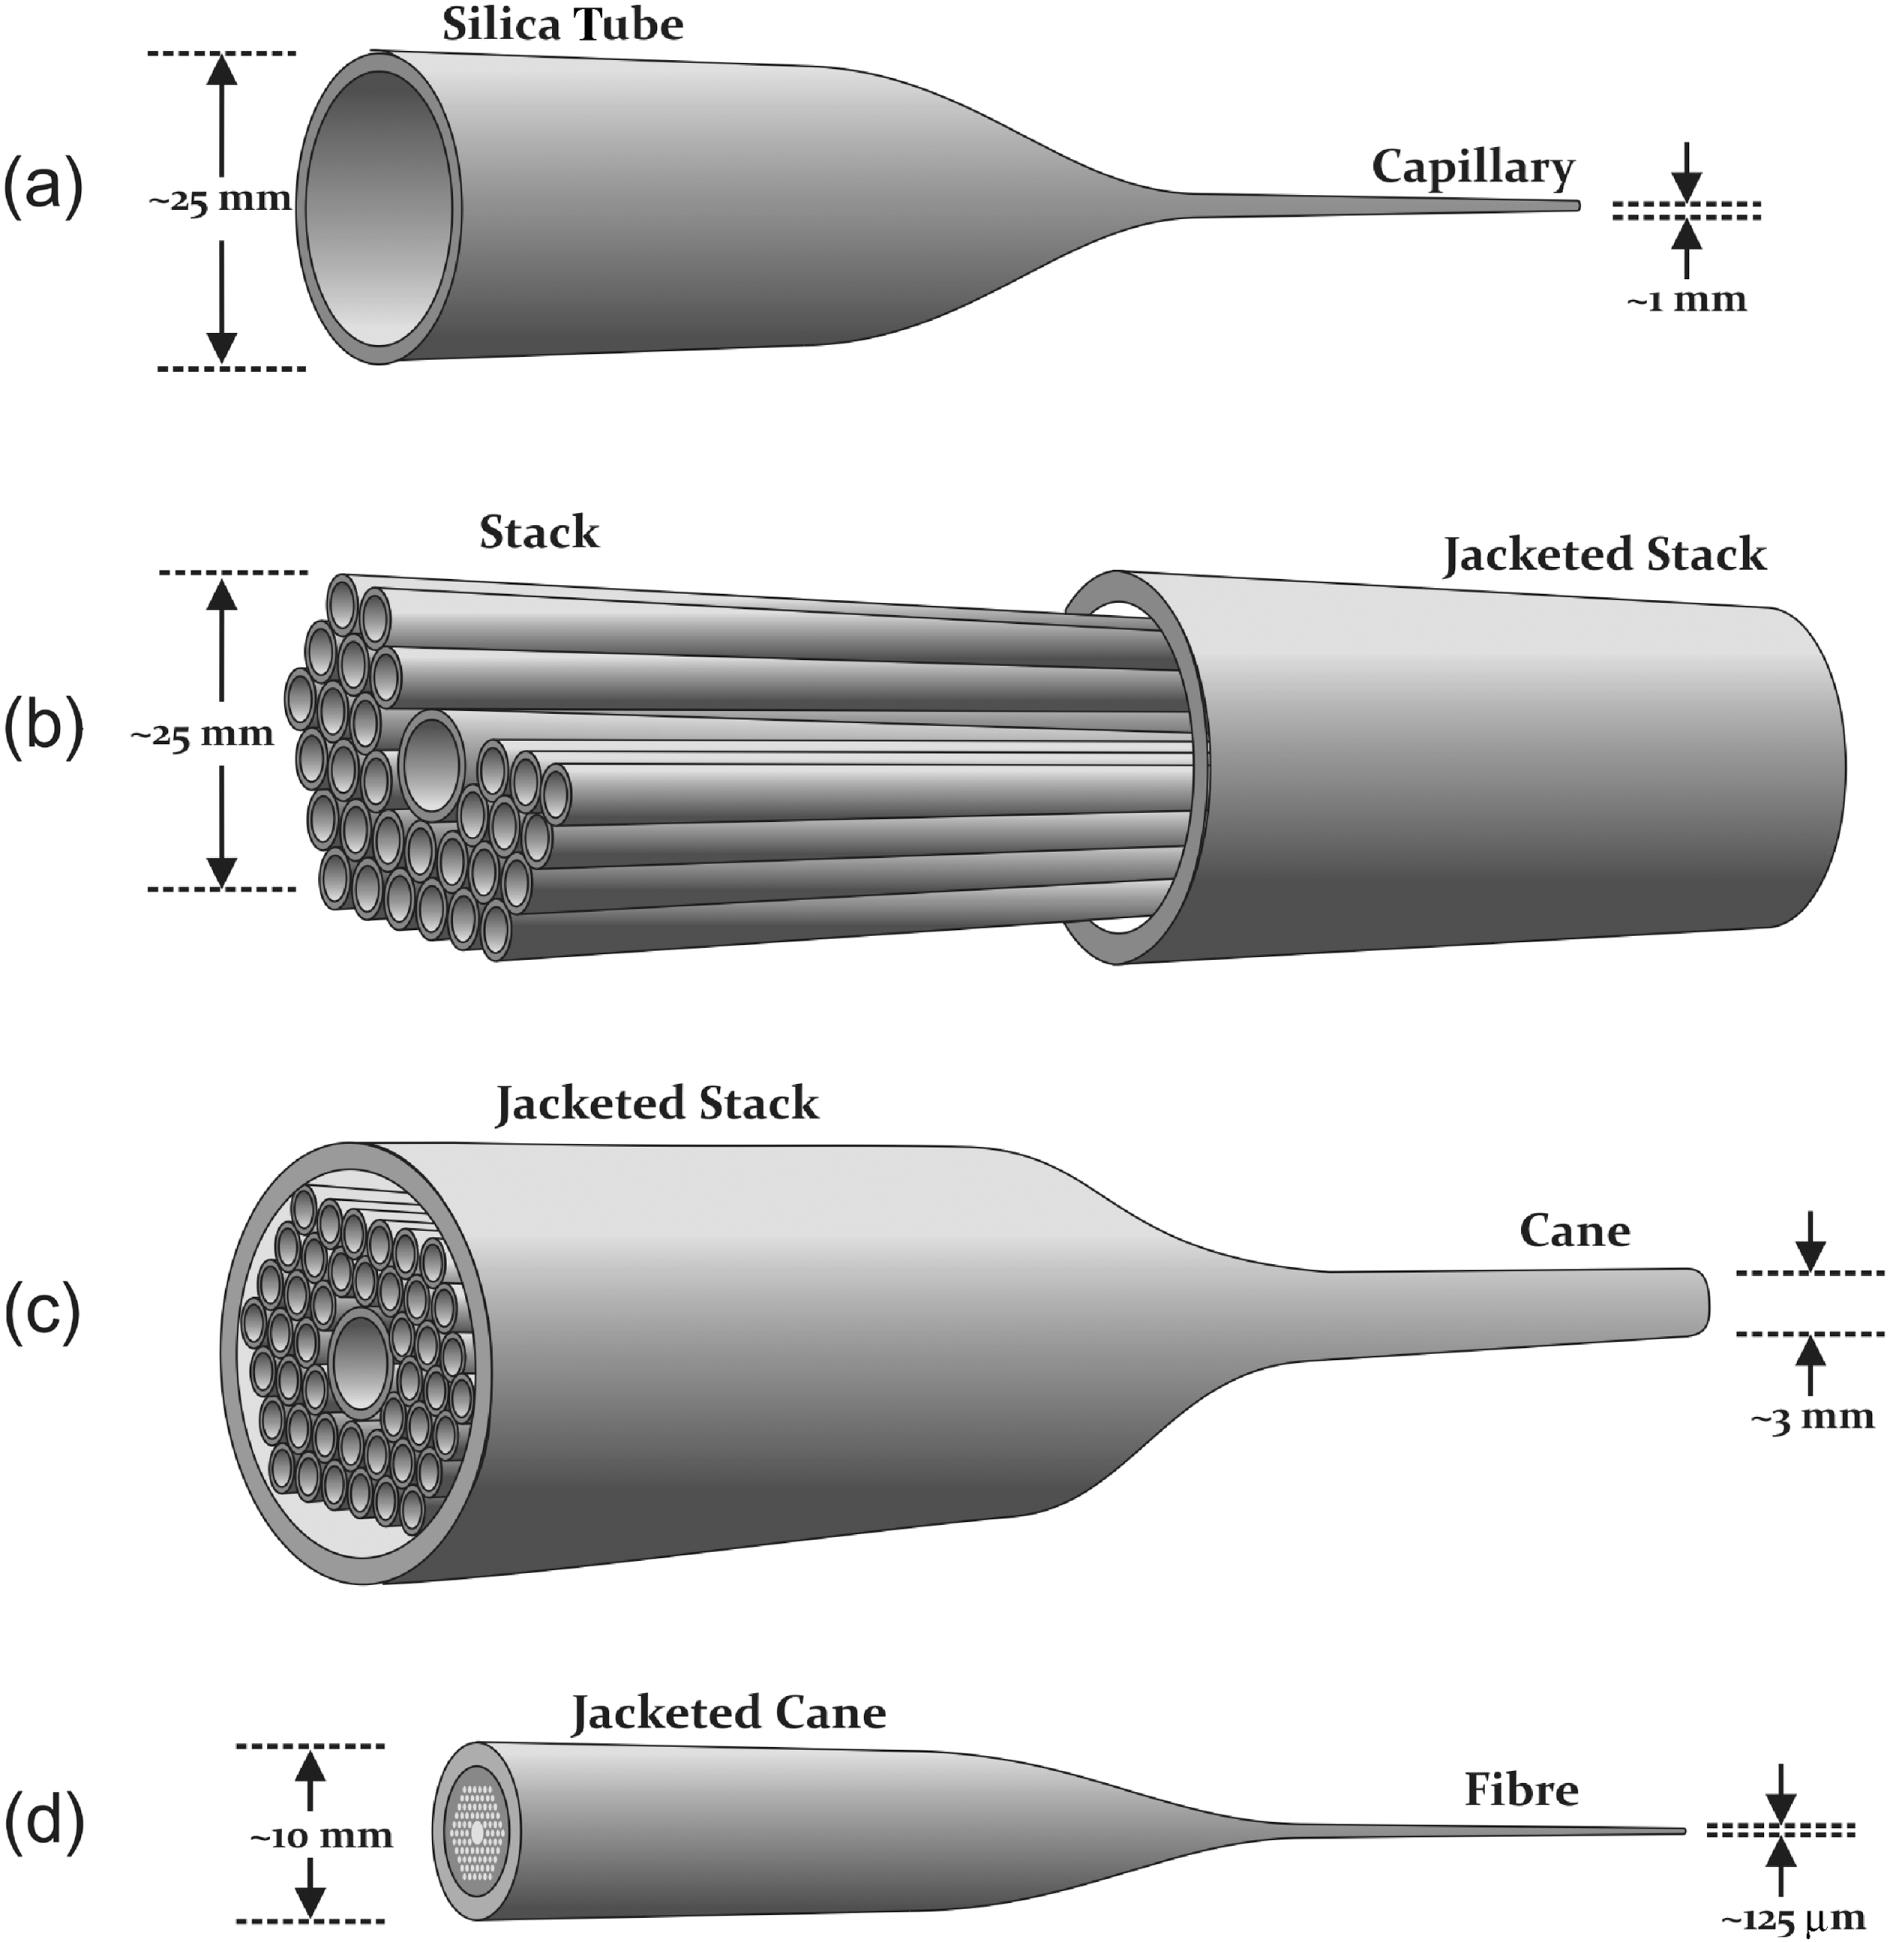 An overview of the entire stack-and-draw technique: (a) drawing of capillaries; (b) capillaries are stacked and inserted into a larger tube; (c) the jacketed stack is drawn to smaller canes; and (d) the jacketed canes is drawn into fibre.